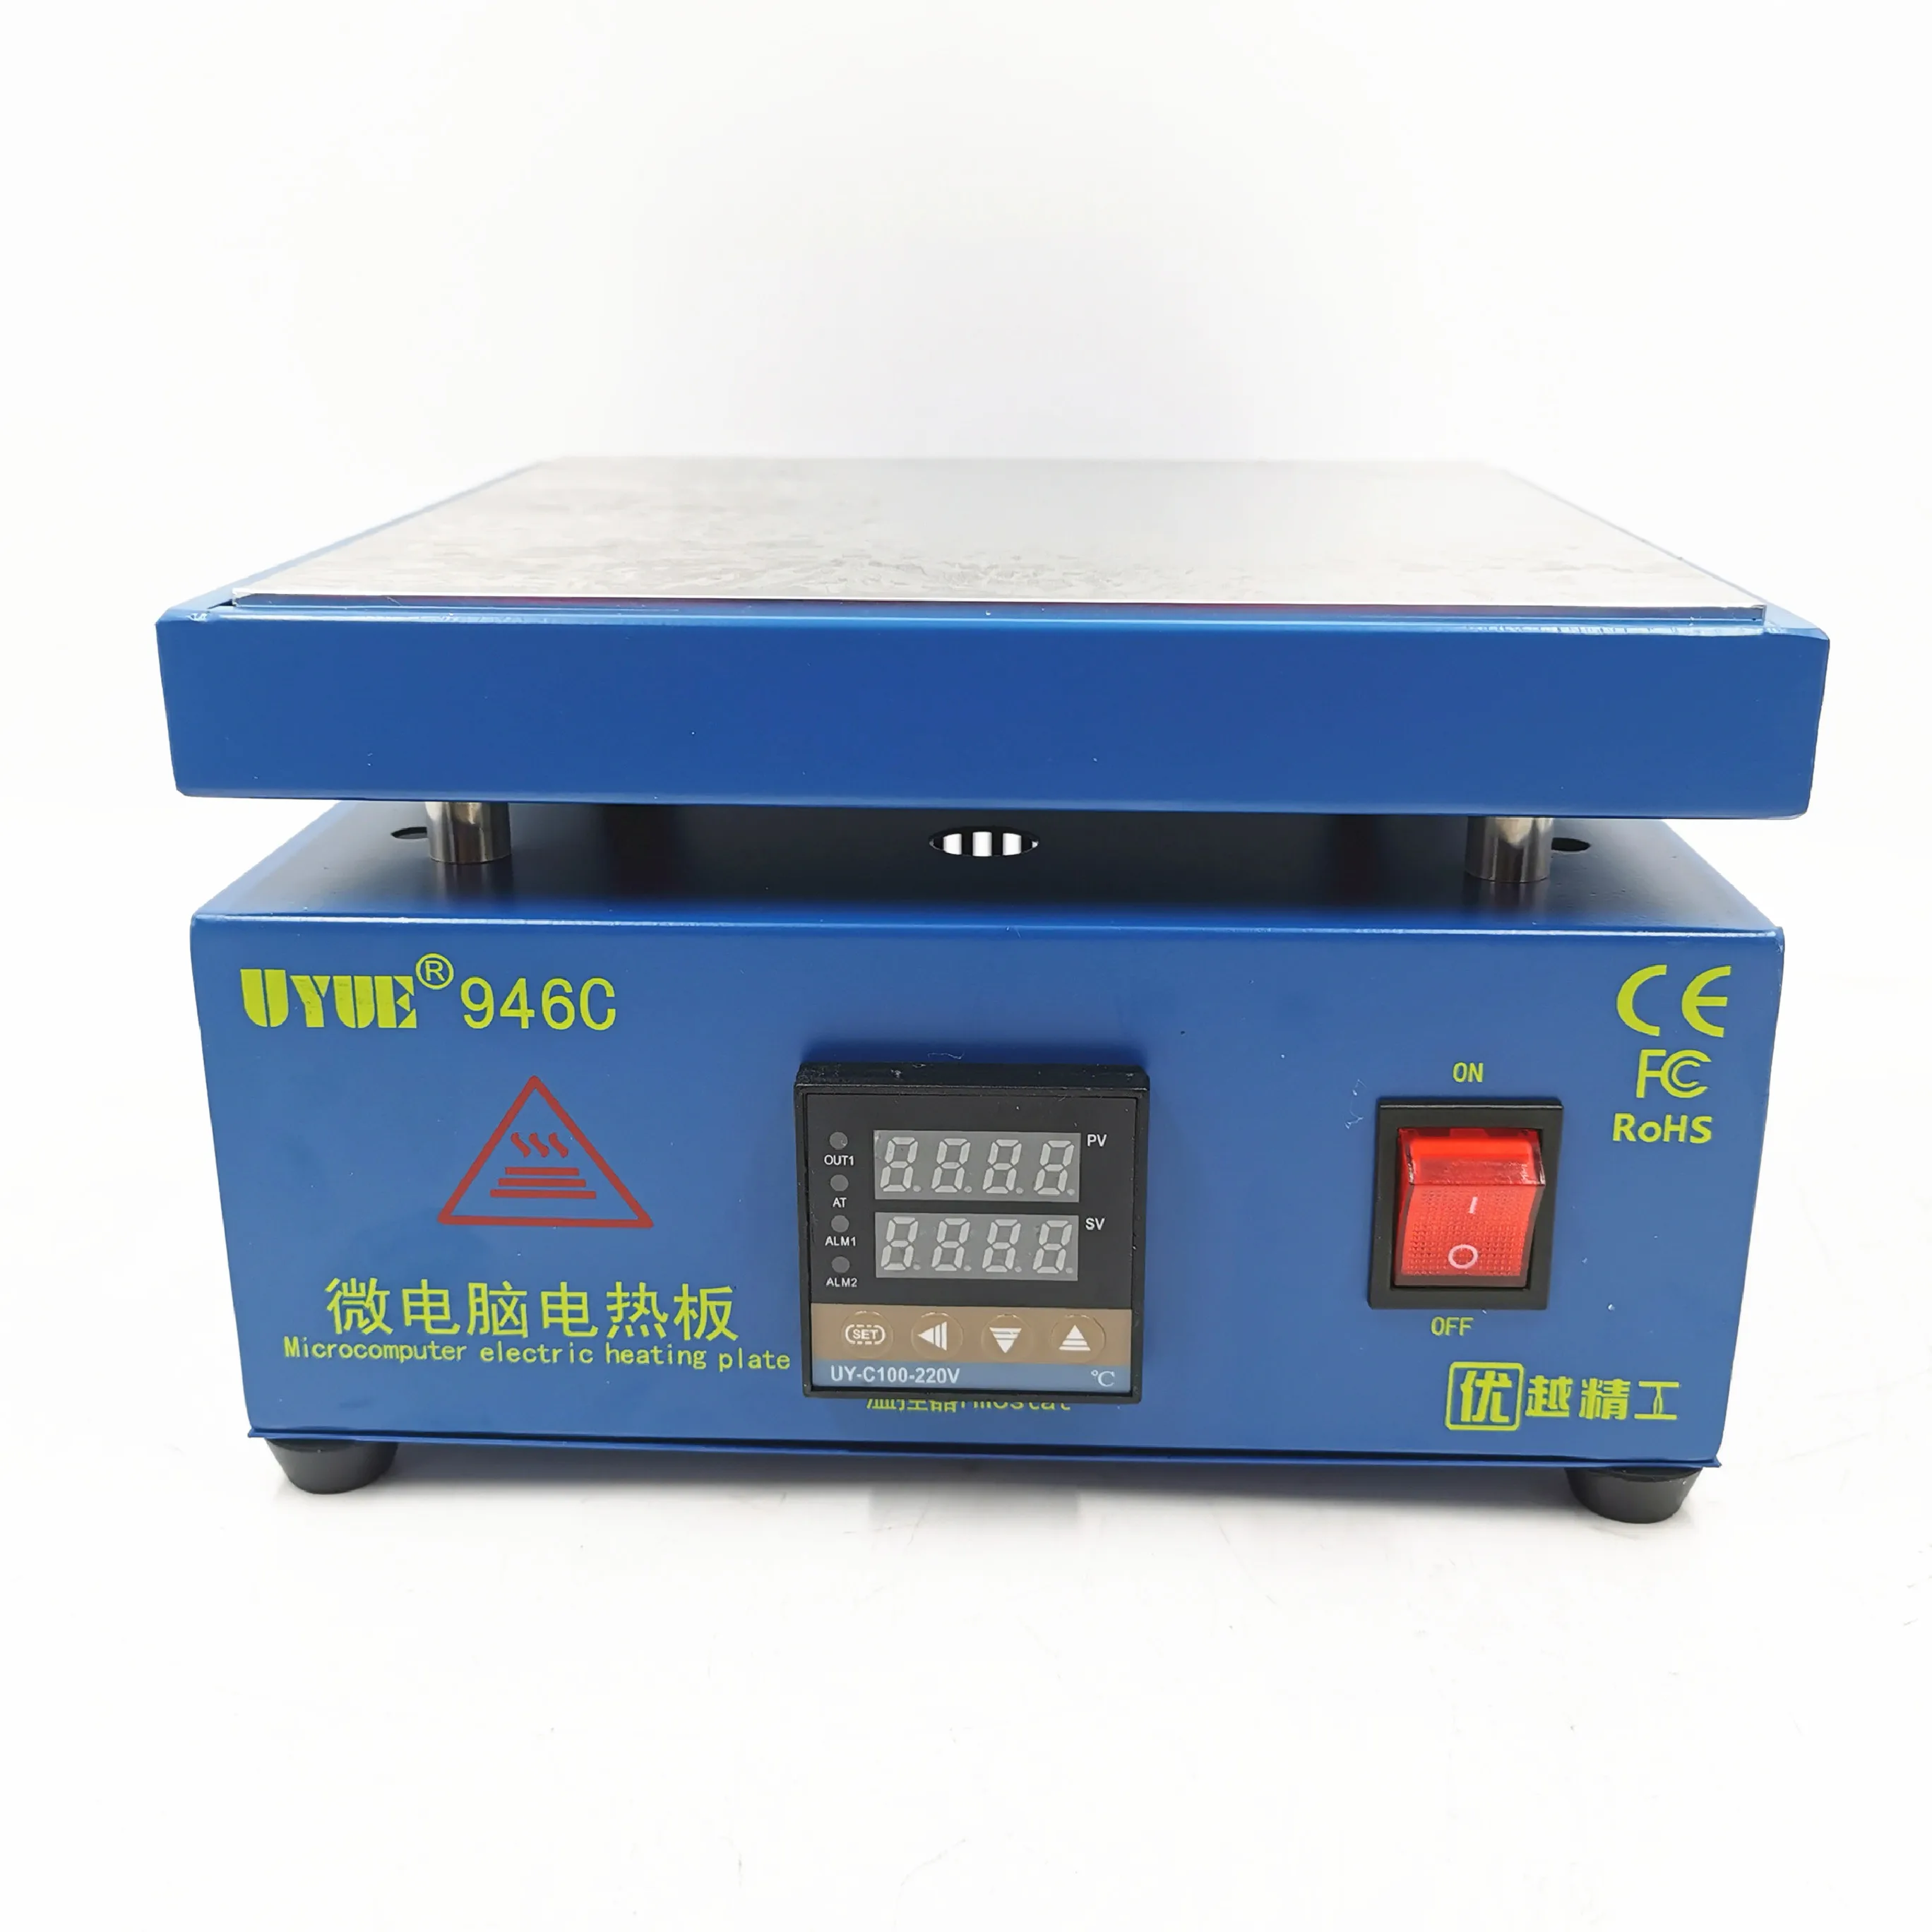 110/220V 600W 946C Electronic Hot Plate Preheat Preheating Station 200x200mm For BGA PCB SMD Heating Led Lamp Desoldering enlarge